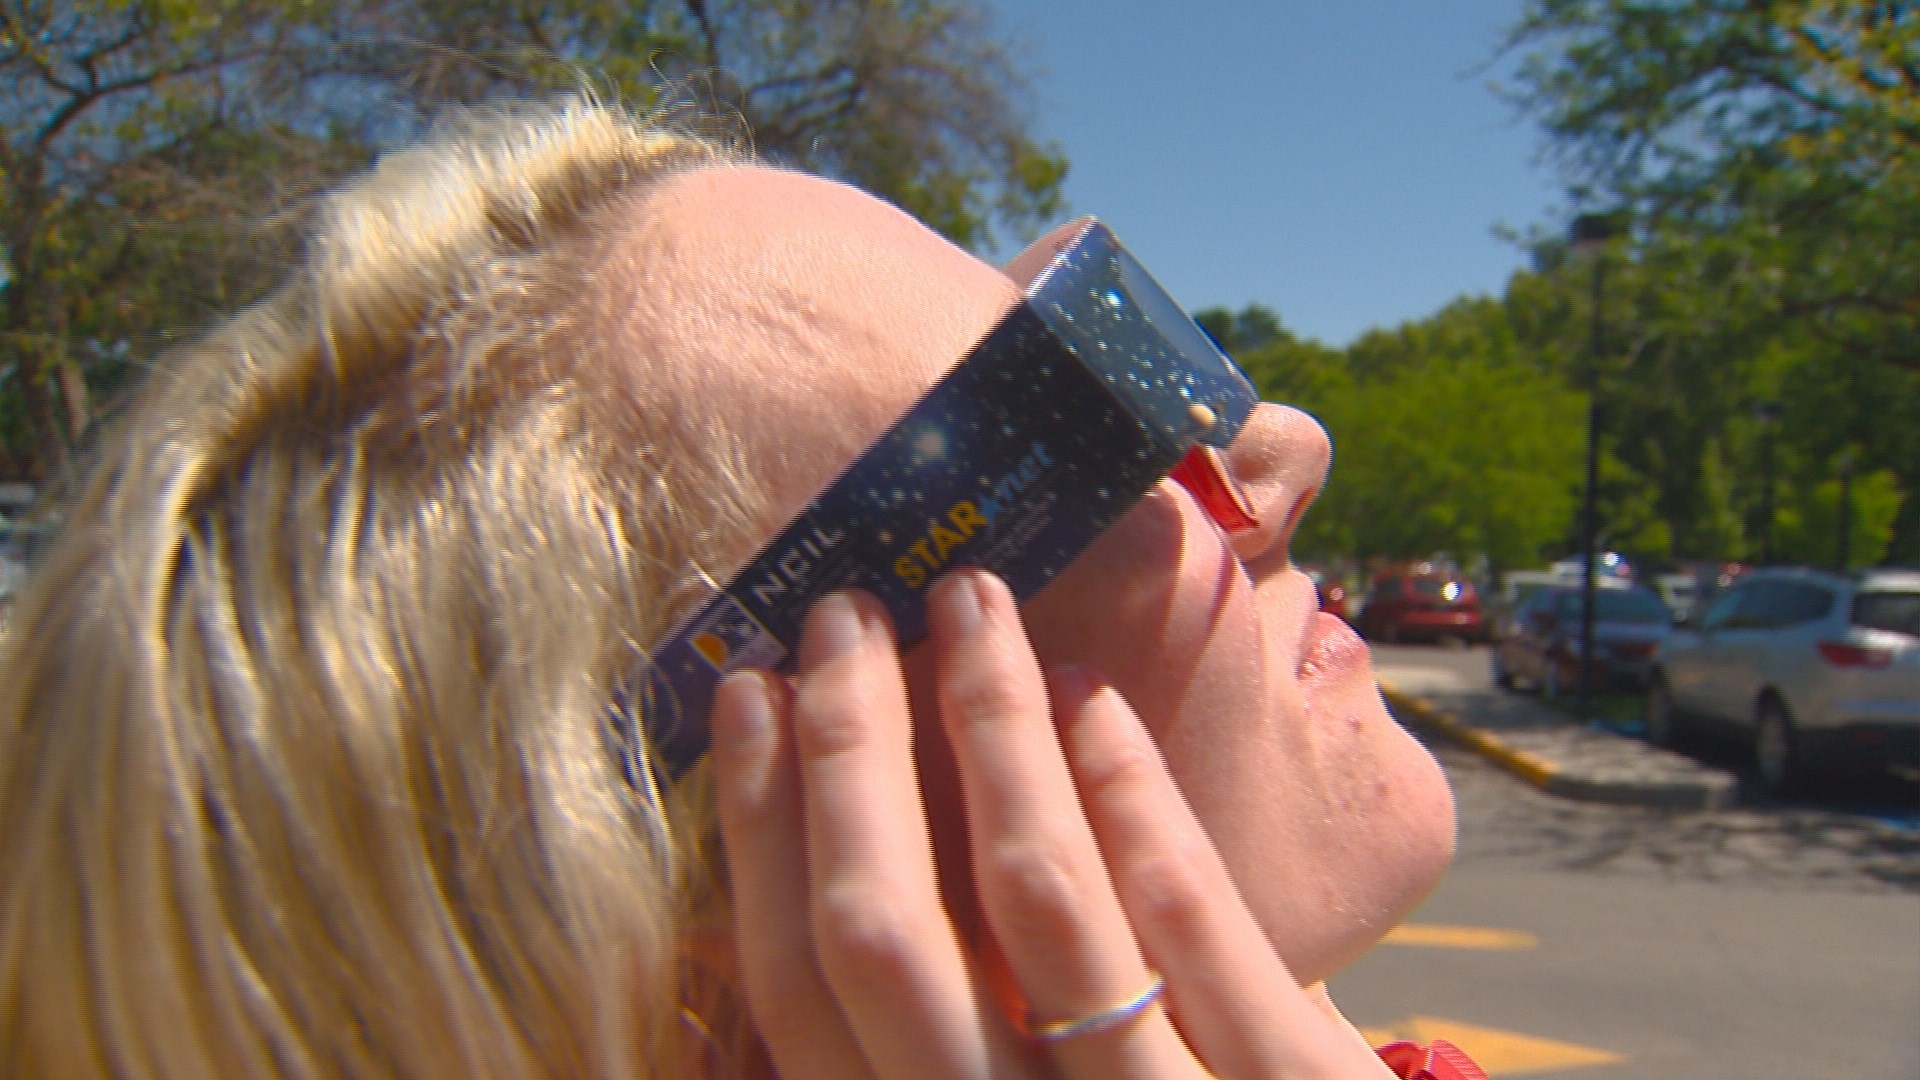 Eclipse glasses sold out almost everywhere around the Valley